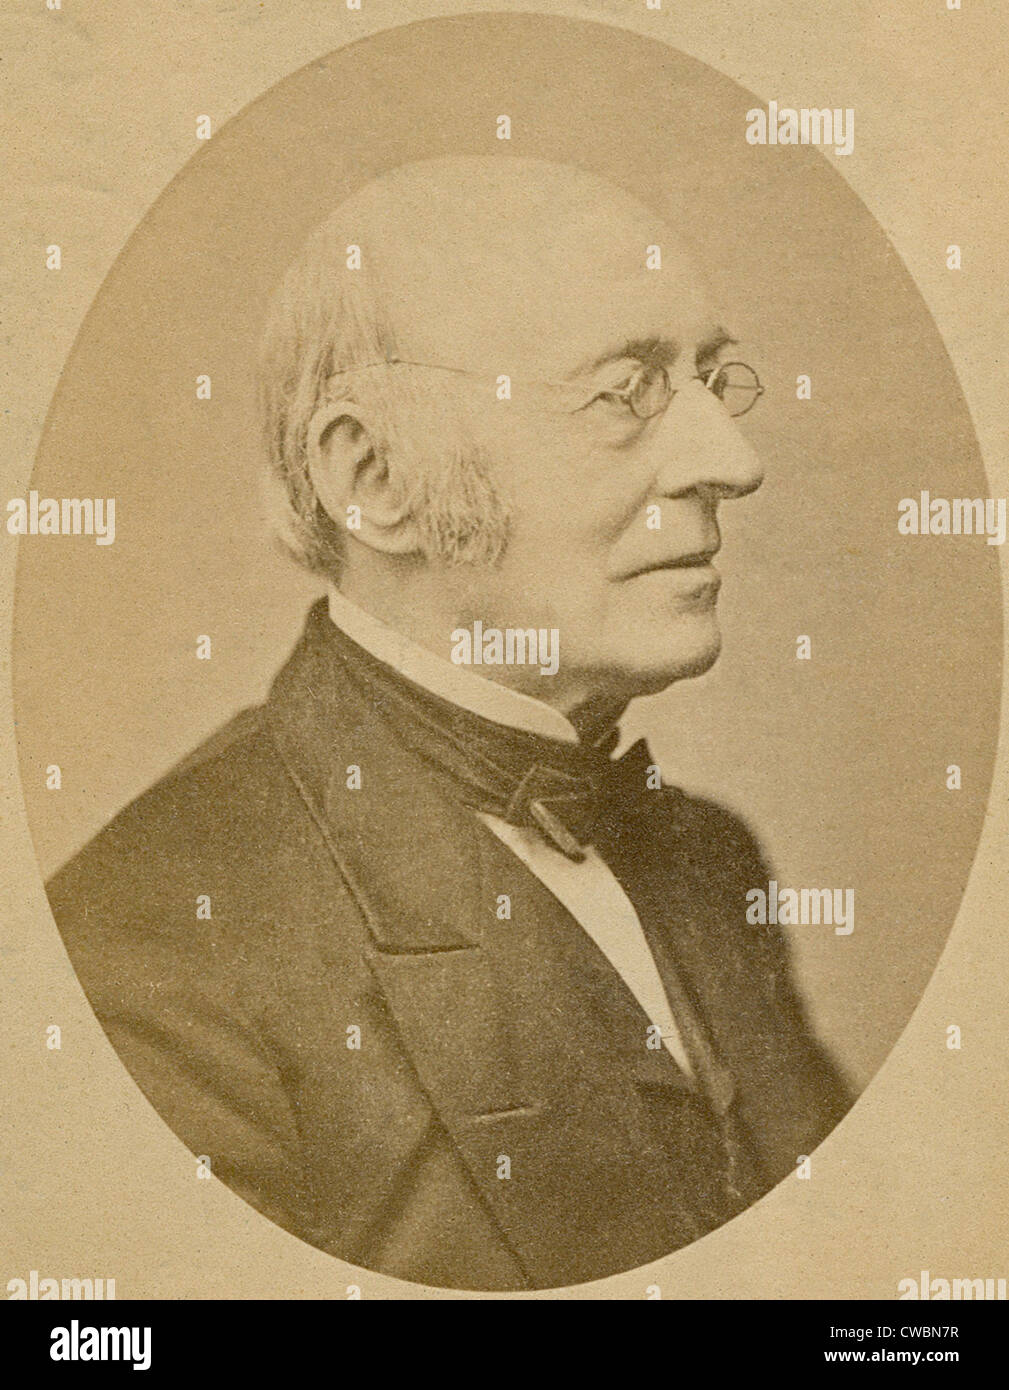 William Lloyd Garrison (1805-1879), joined the Abolitionist movement at age 25 and he founded THE LIBERATOR, an antislavery Stock Photo